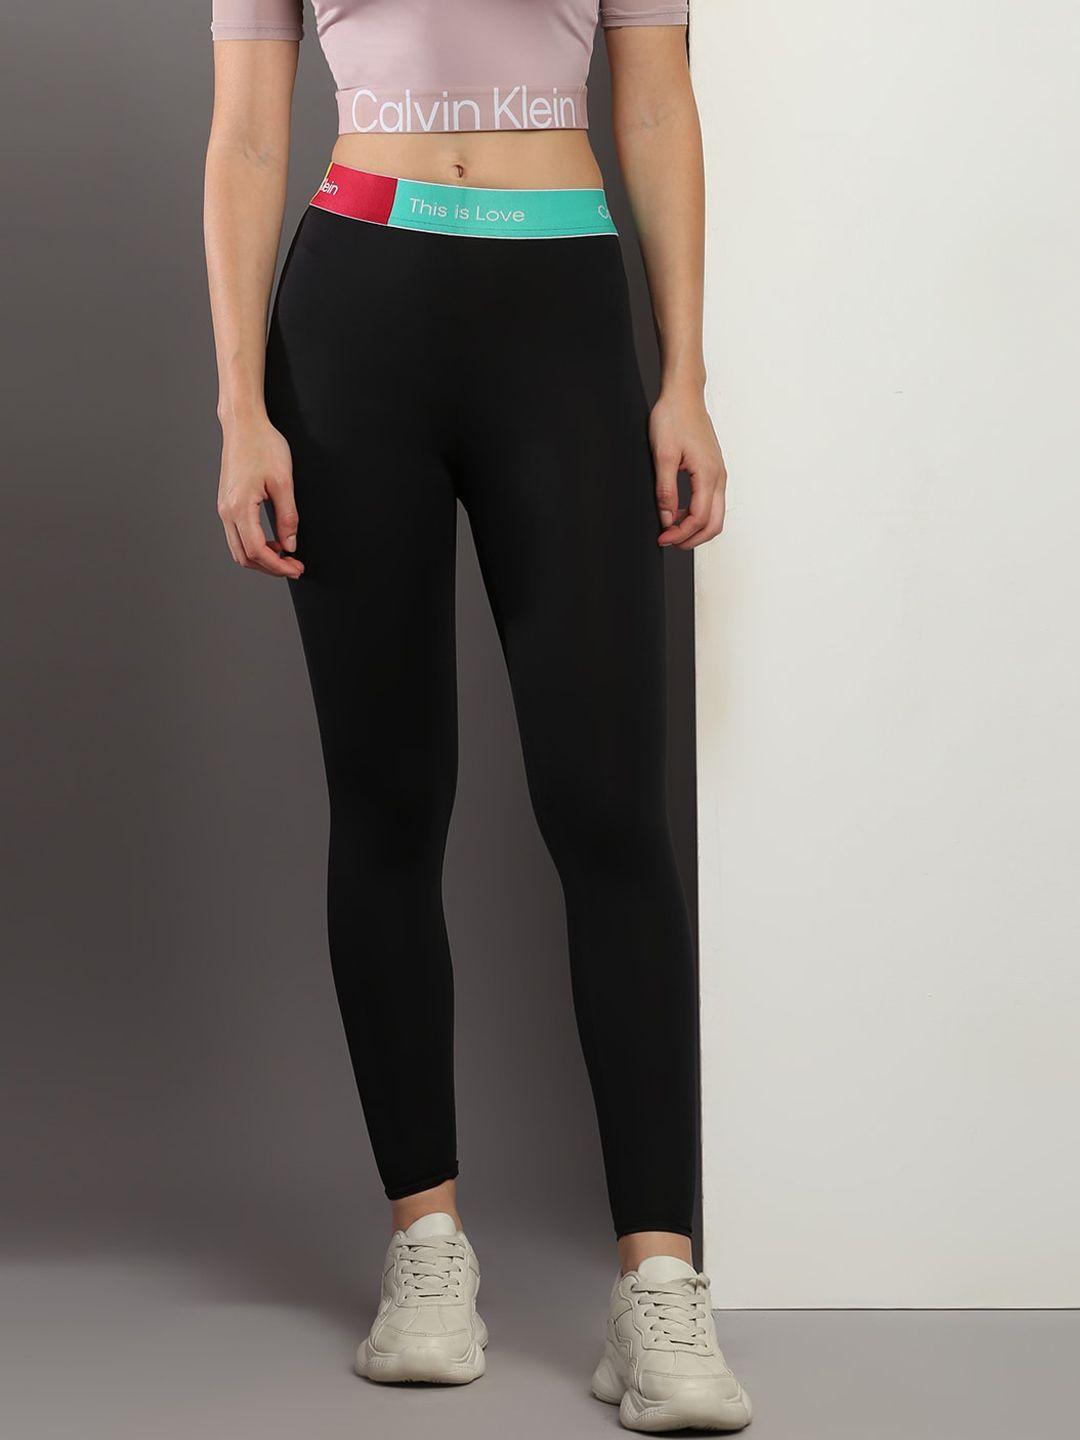 calvin-klein-jeans-women-printed-outer-elasticated-waistband-ankle-length-sports-leggings